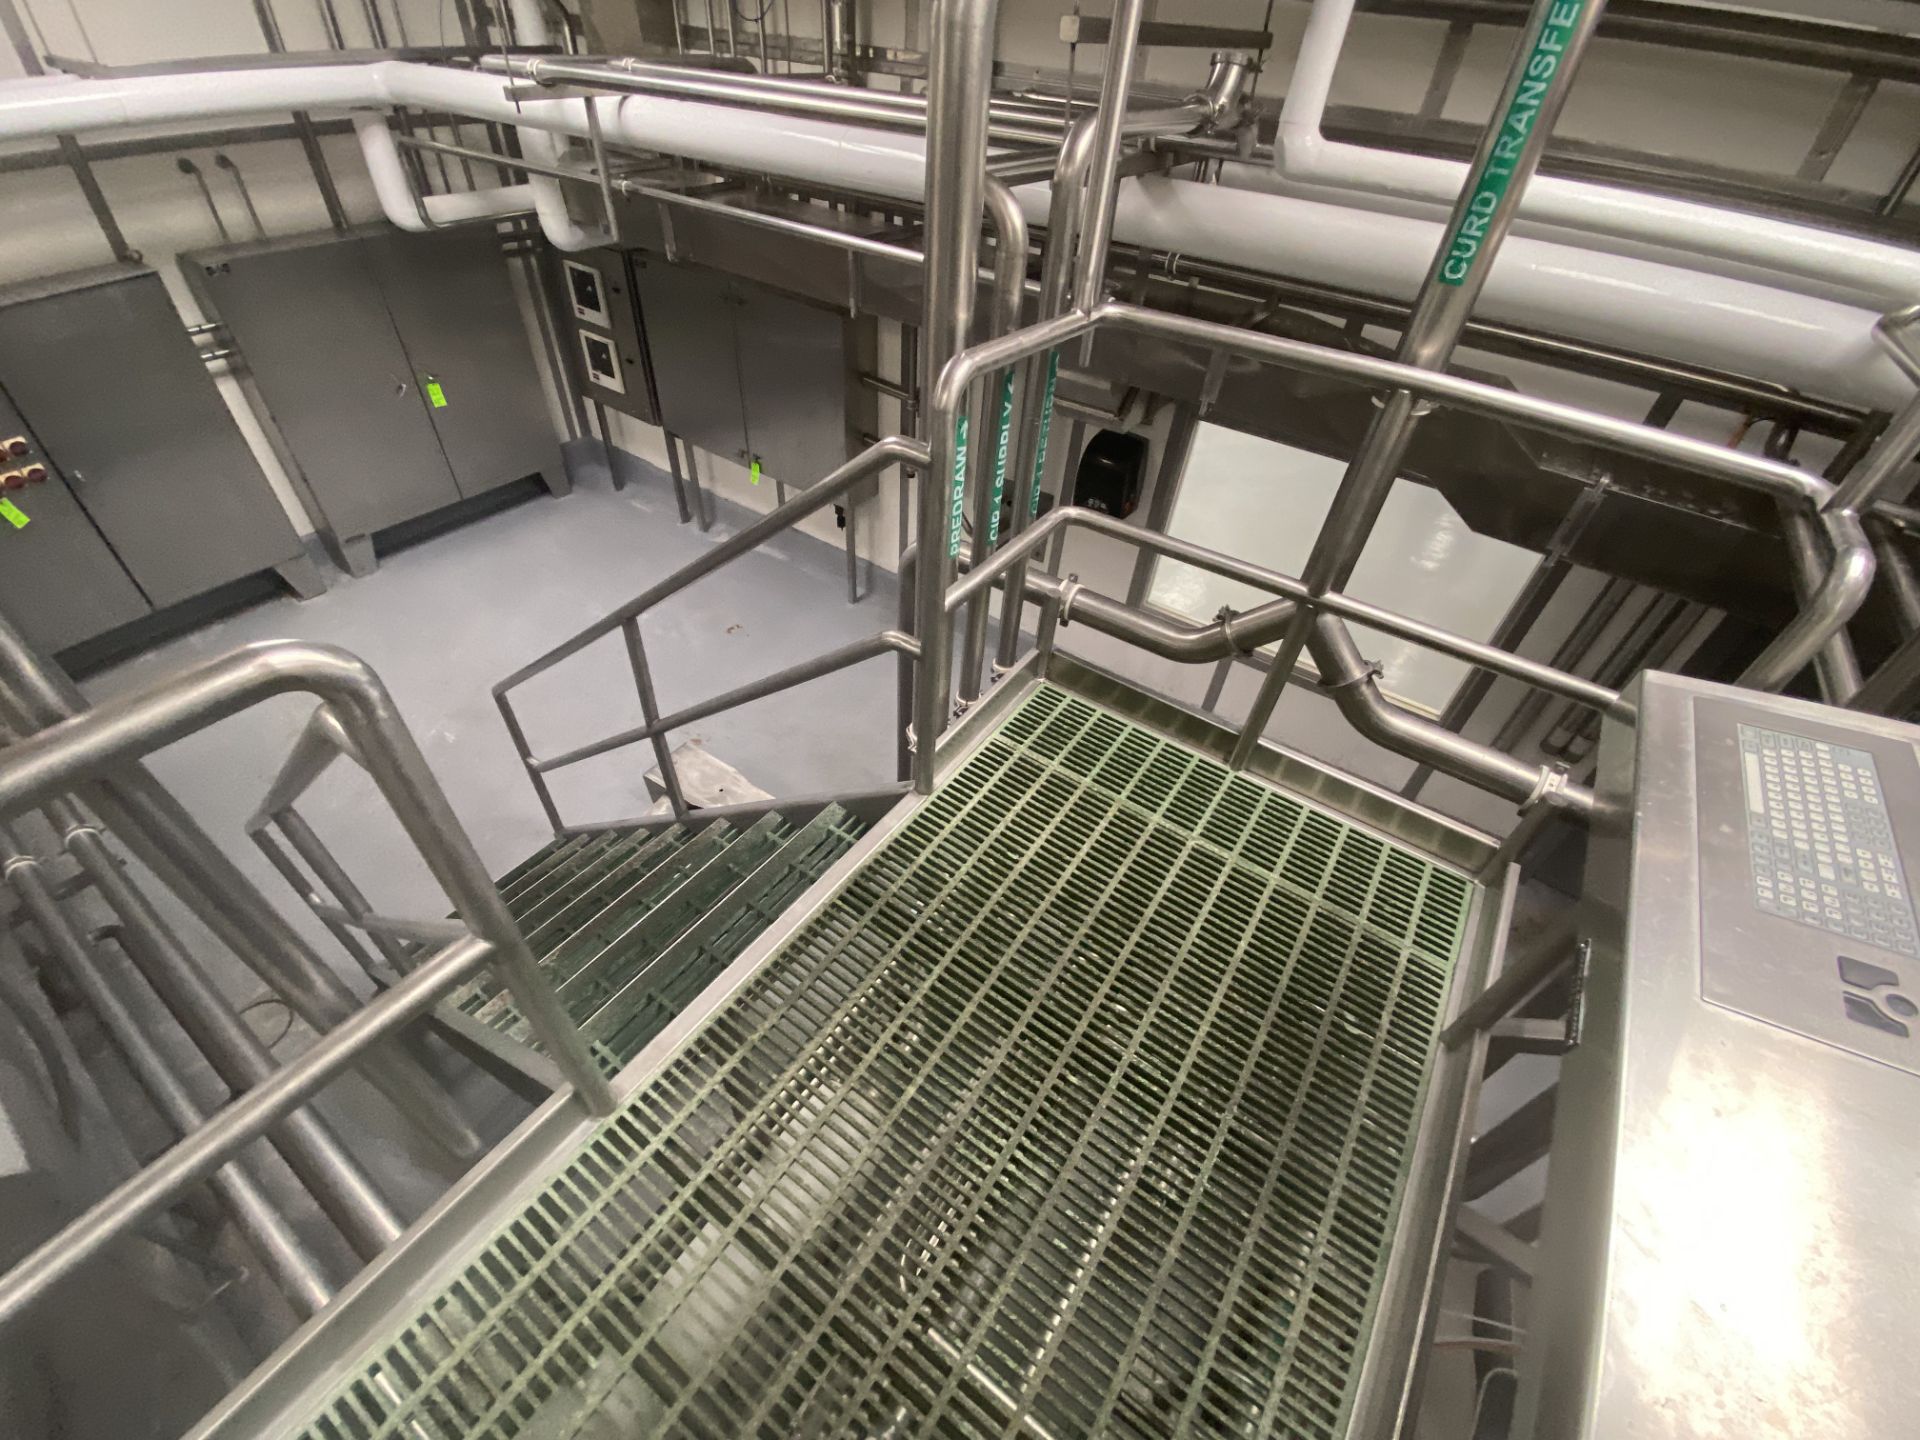 S/S Platform Servicing 4 Double O Cheese Vats, with (2) Sets of Stairs, S/S Framing & Handrails, - Image 2 of 6